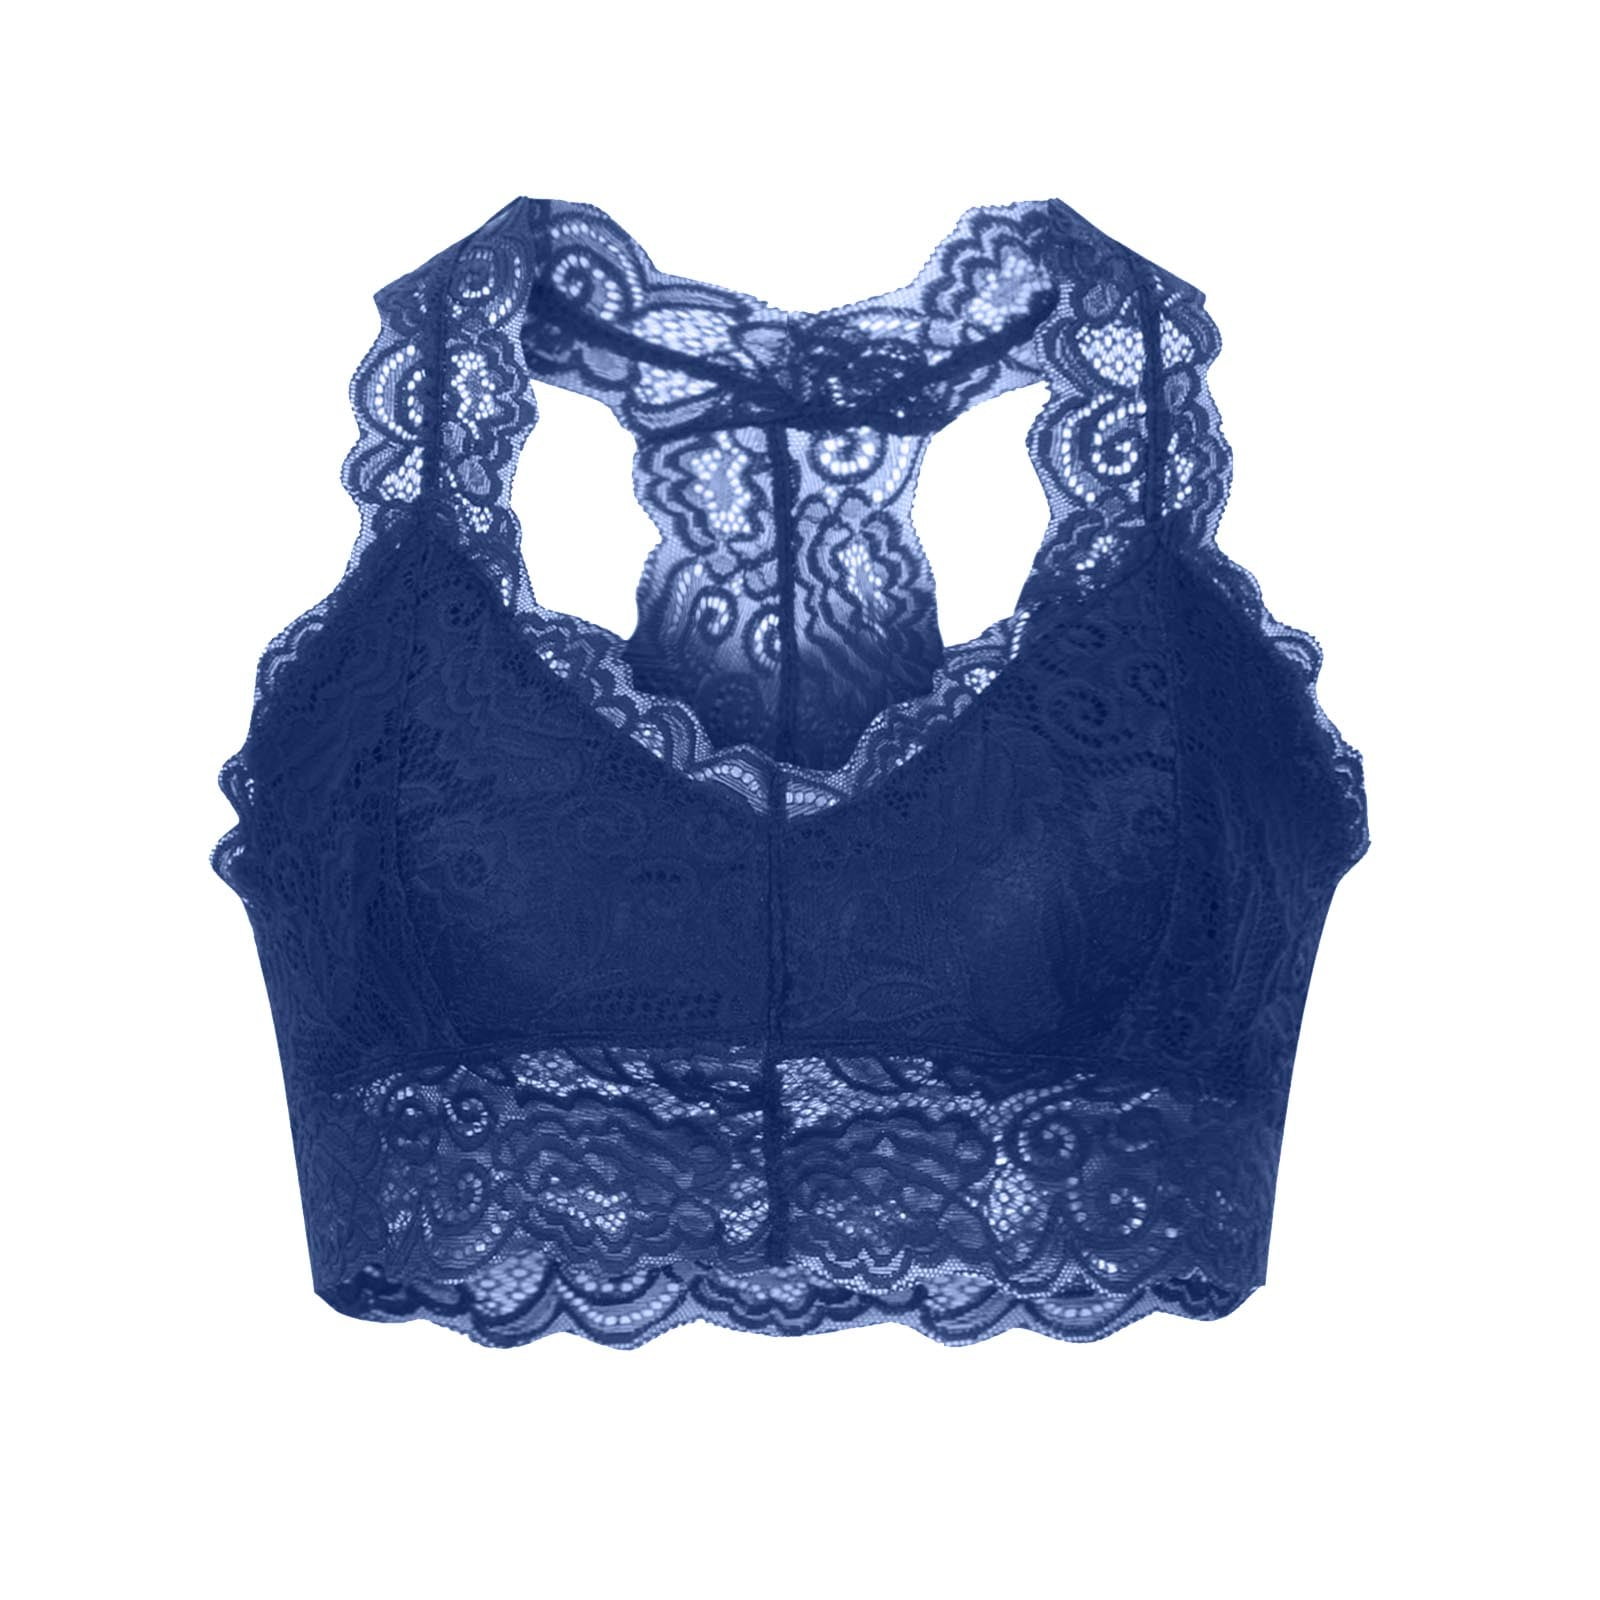 CTEEGC Promotion Womens Floral Lace Bra Padded Breathable Bralette